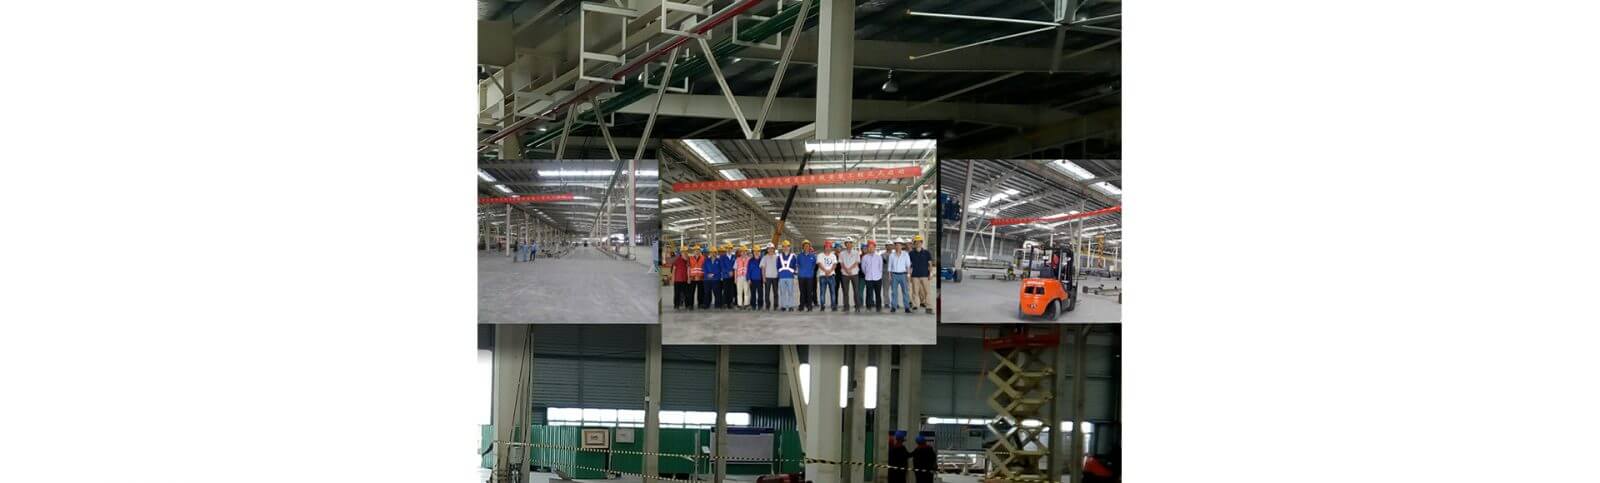 Image First Installation of Bodyline Mainline at Wuling Motors’ Factory